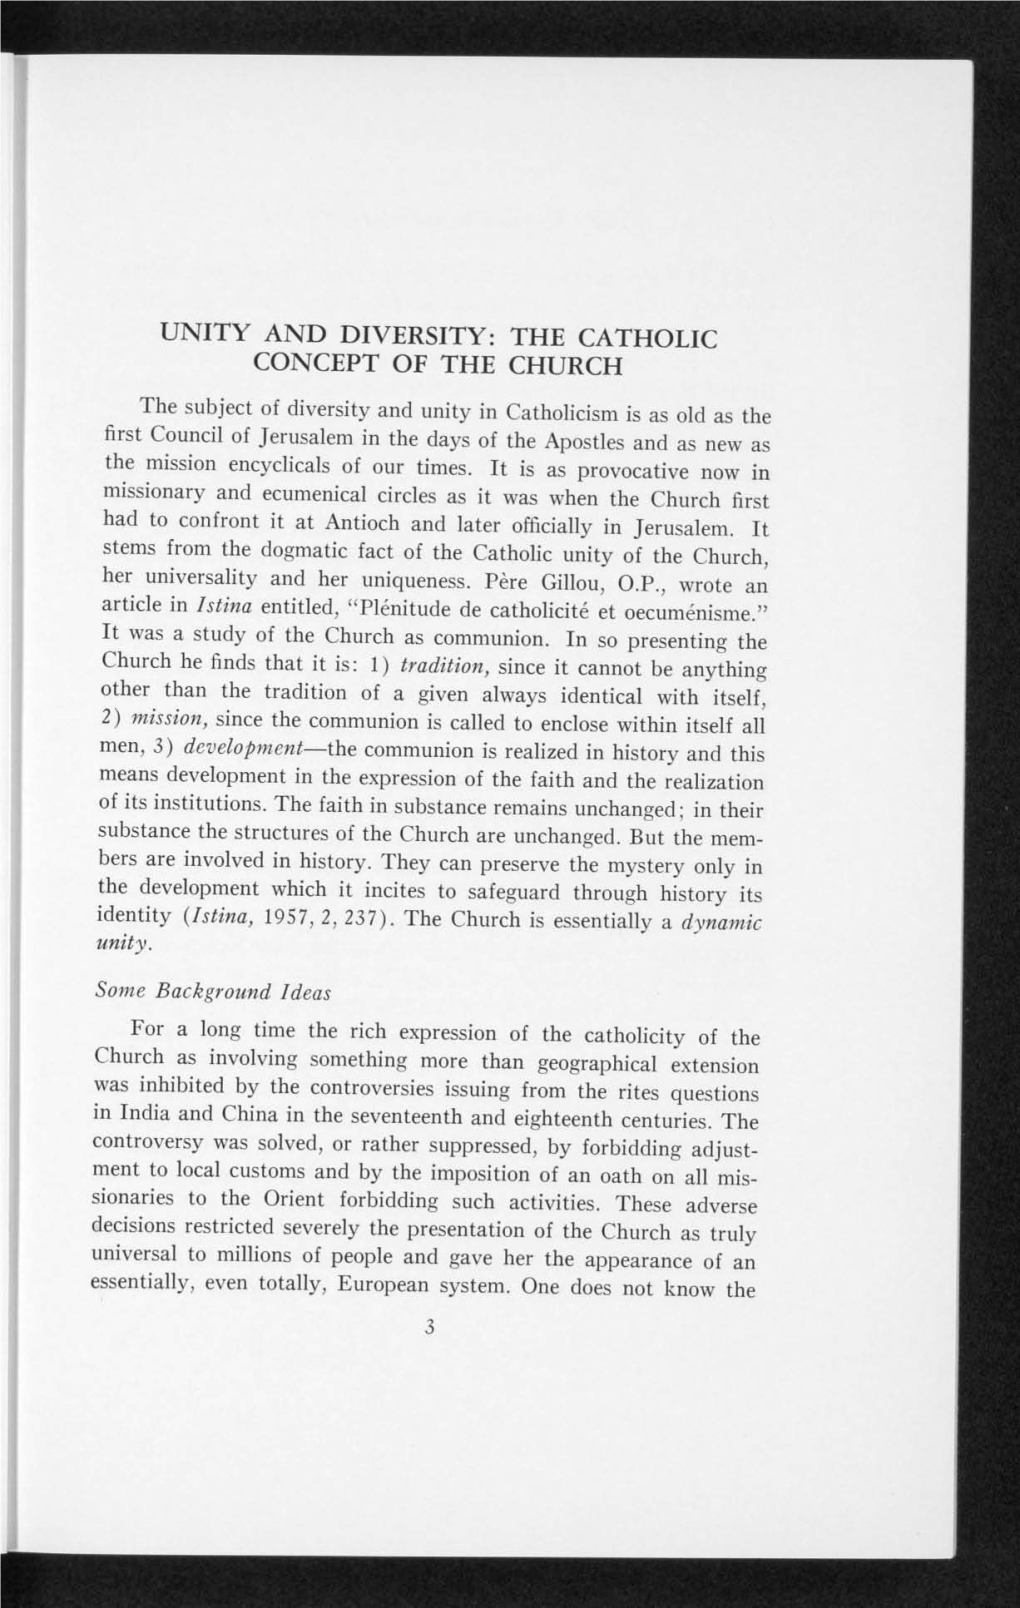 Unity and Diversity: the Catholic Concept of the Church